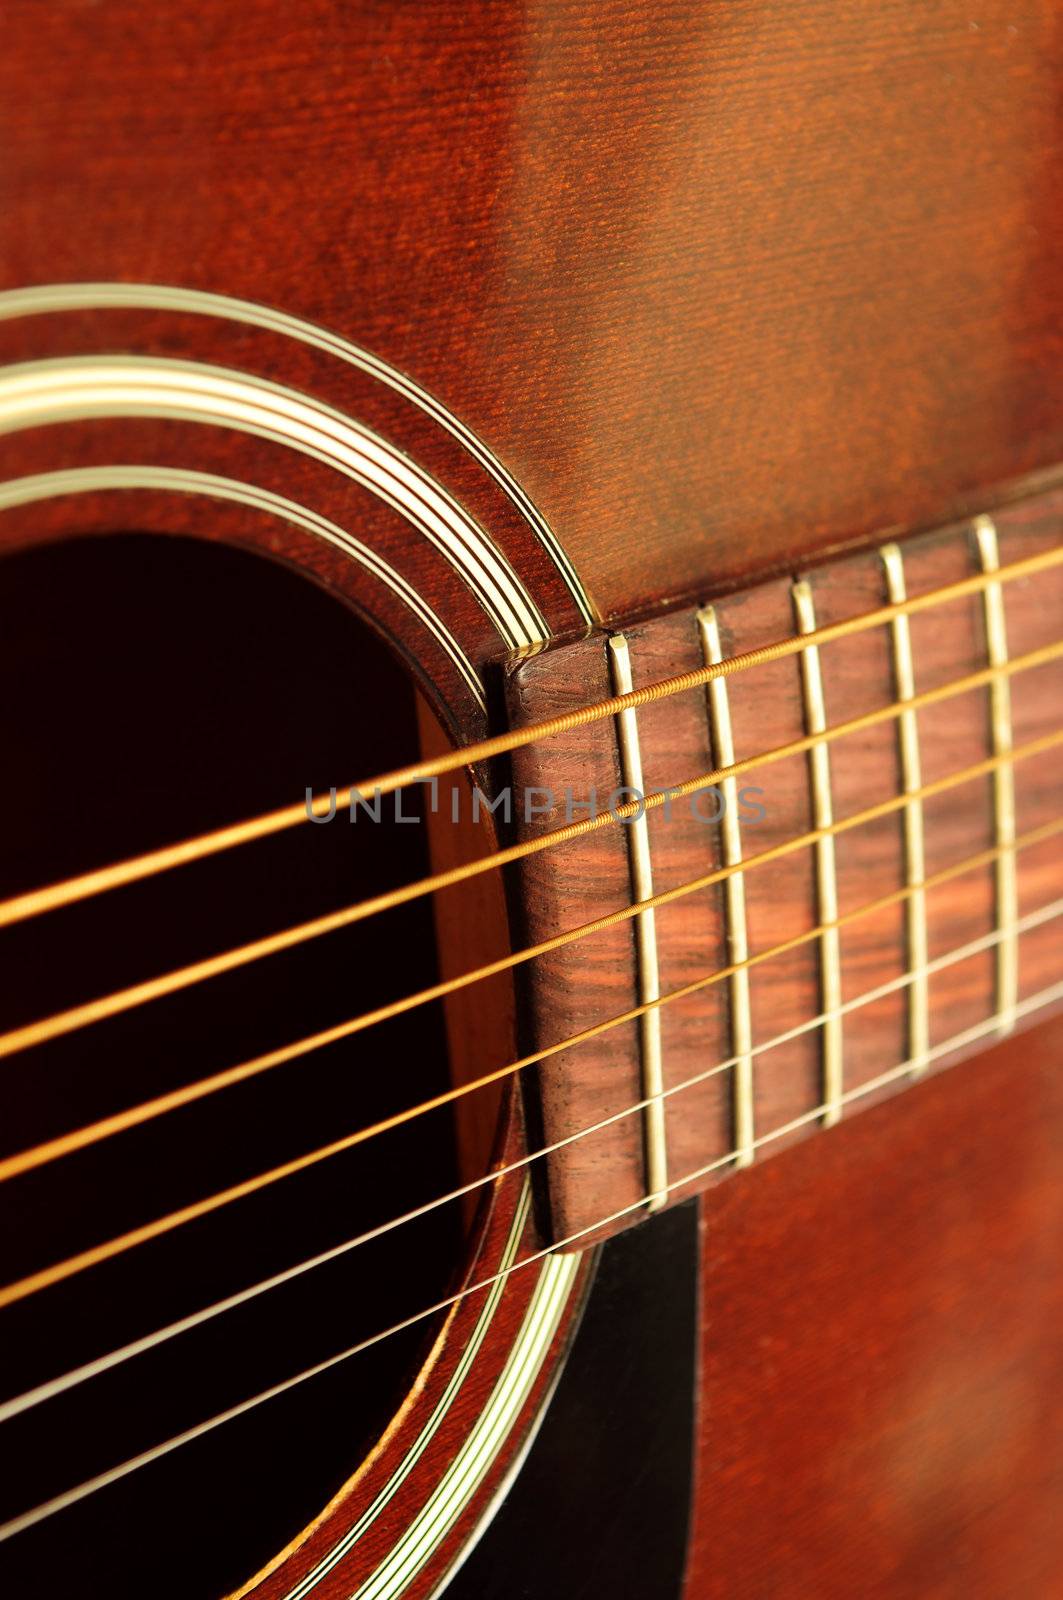 Body of an acoustic guitar close up